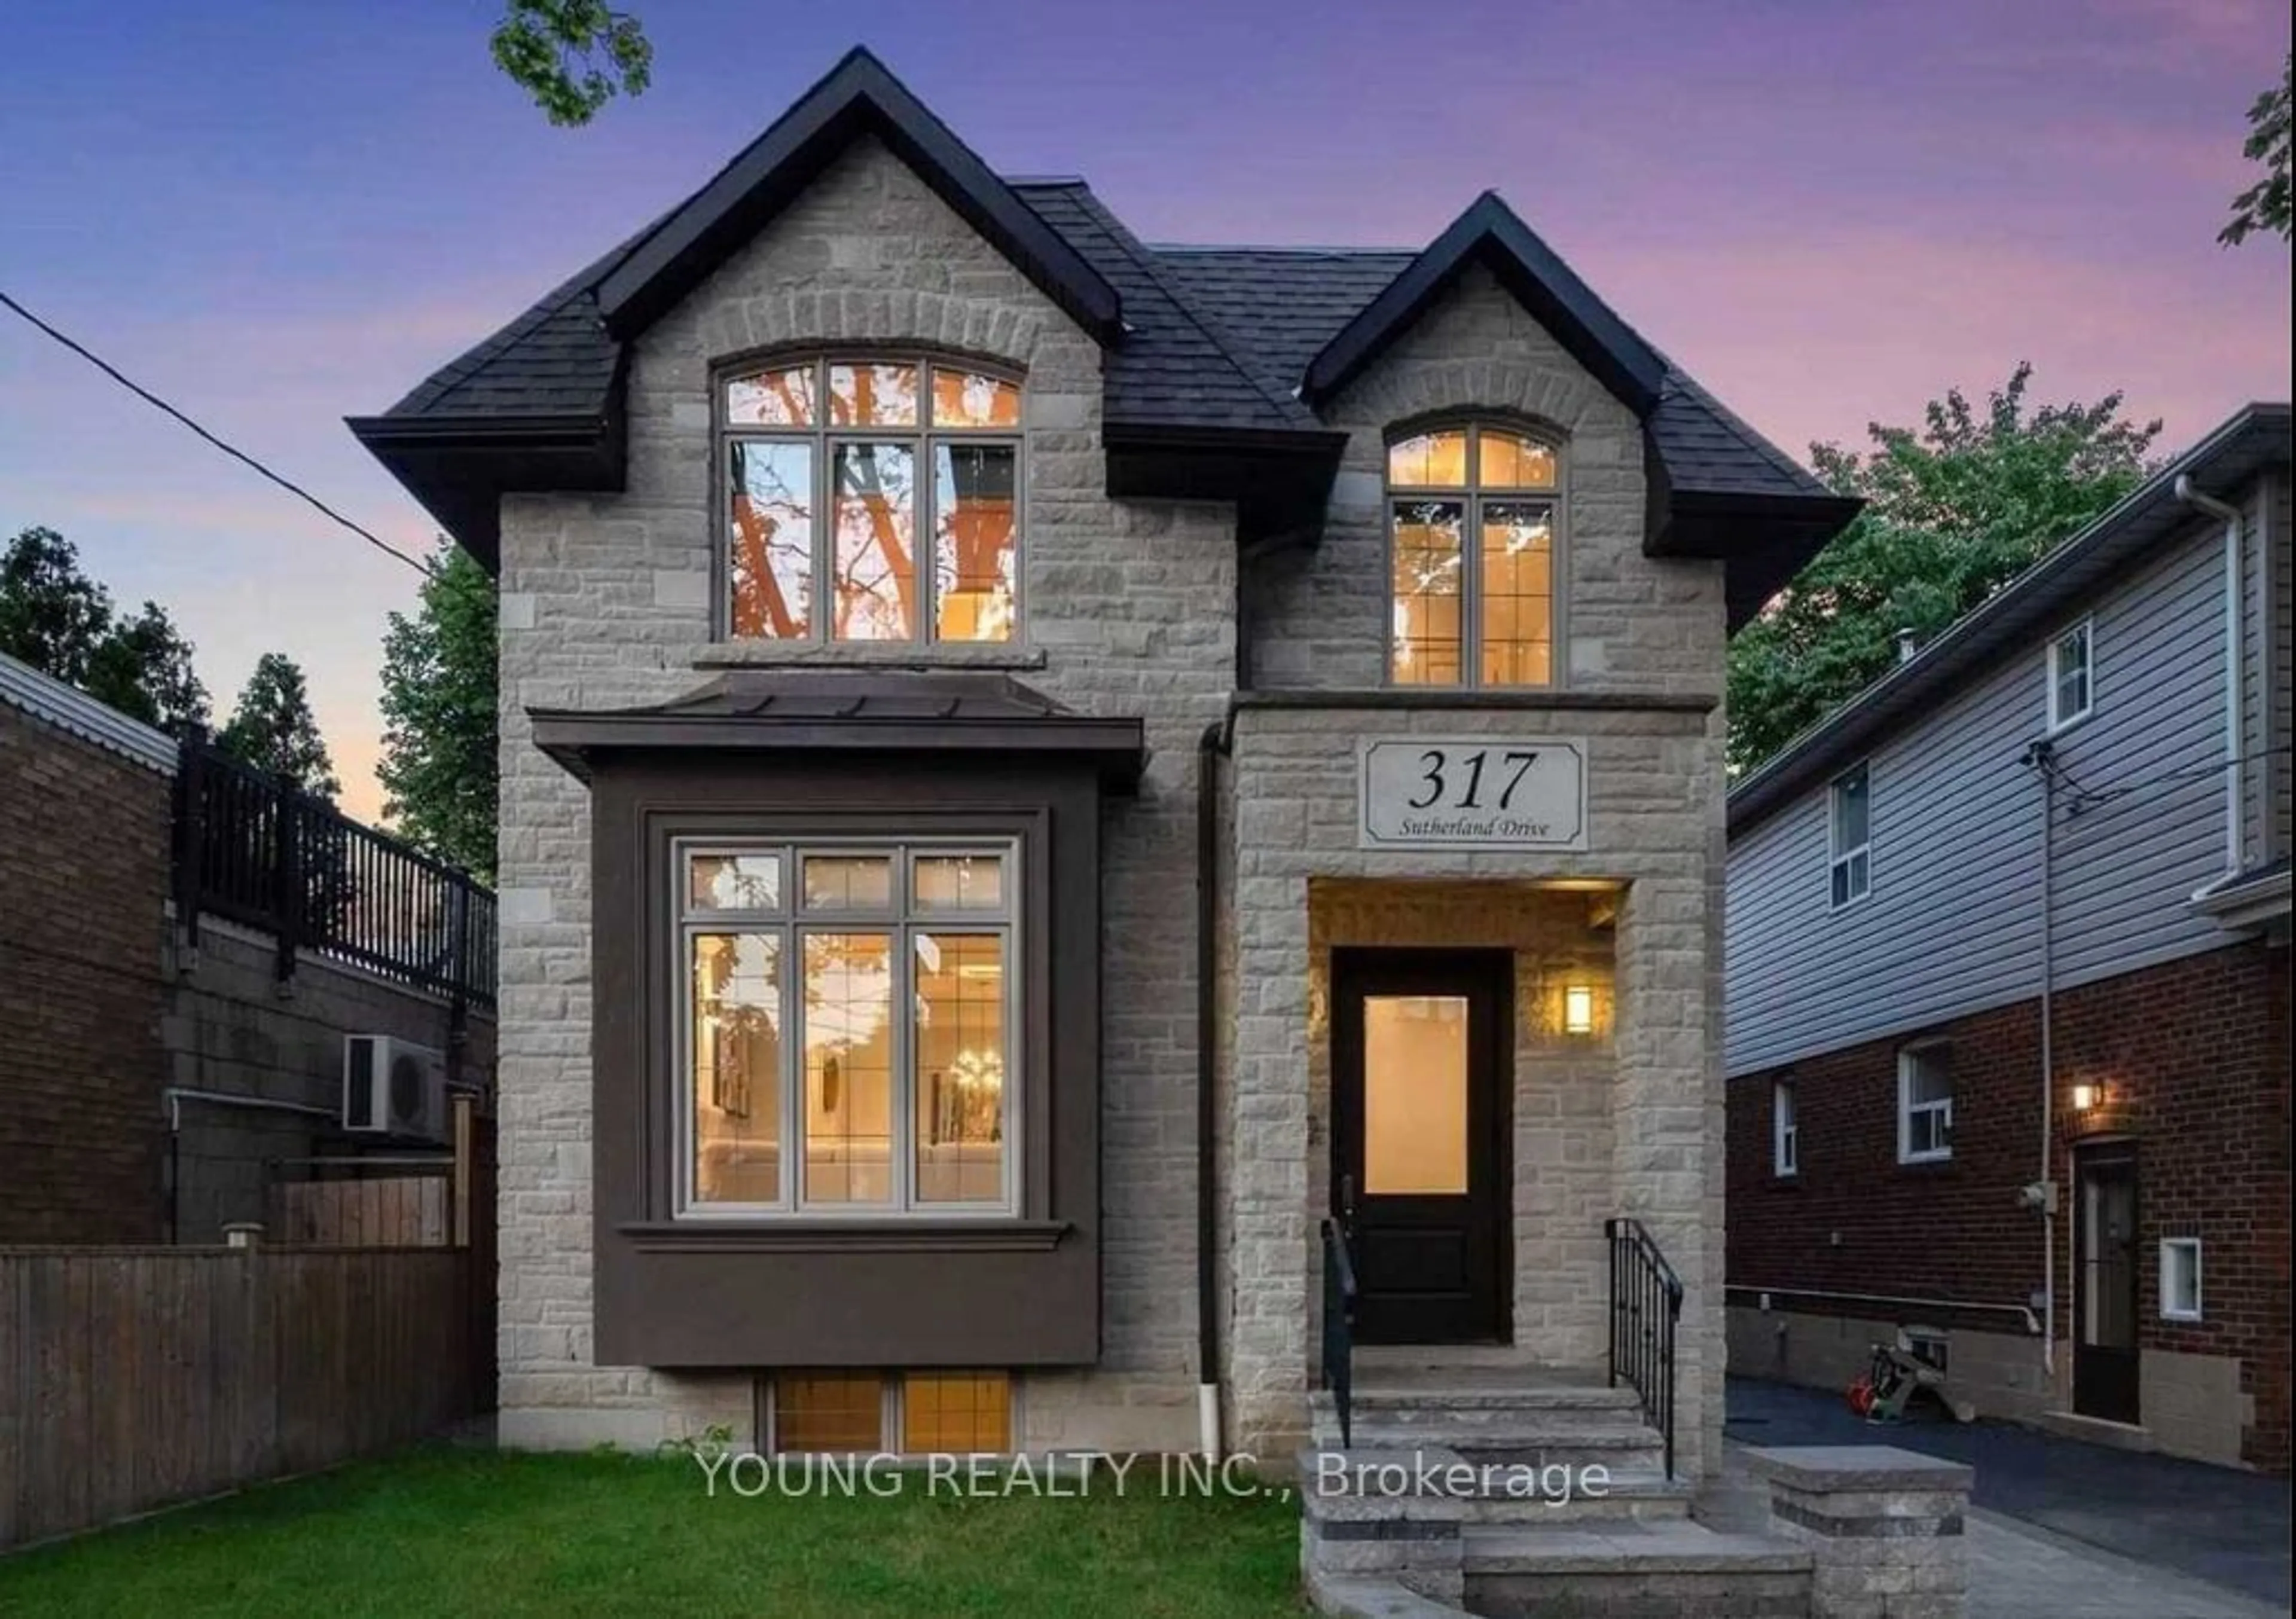 Home with brick exterior material for 317 Sutherland + Laneway Dr, Toronto Ontario M4G 1J6